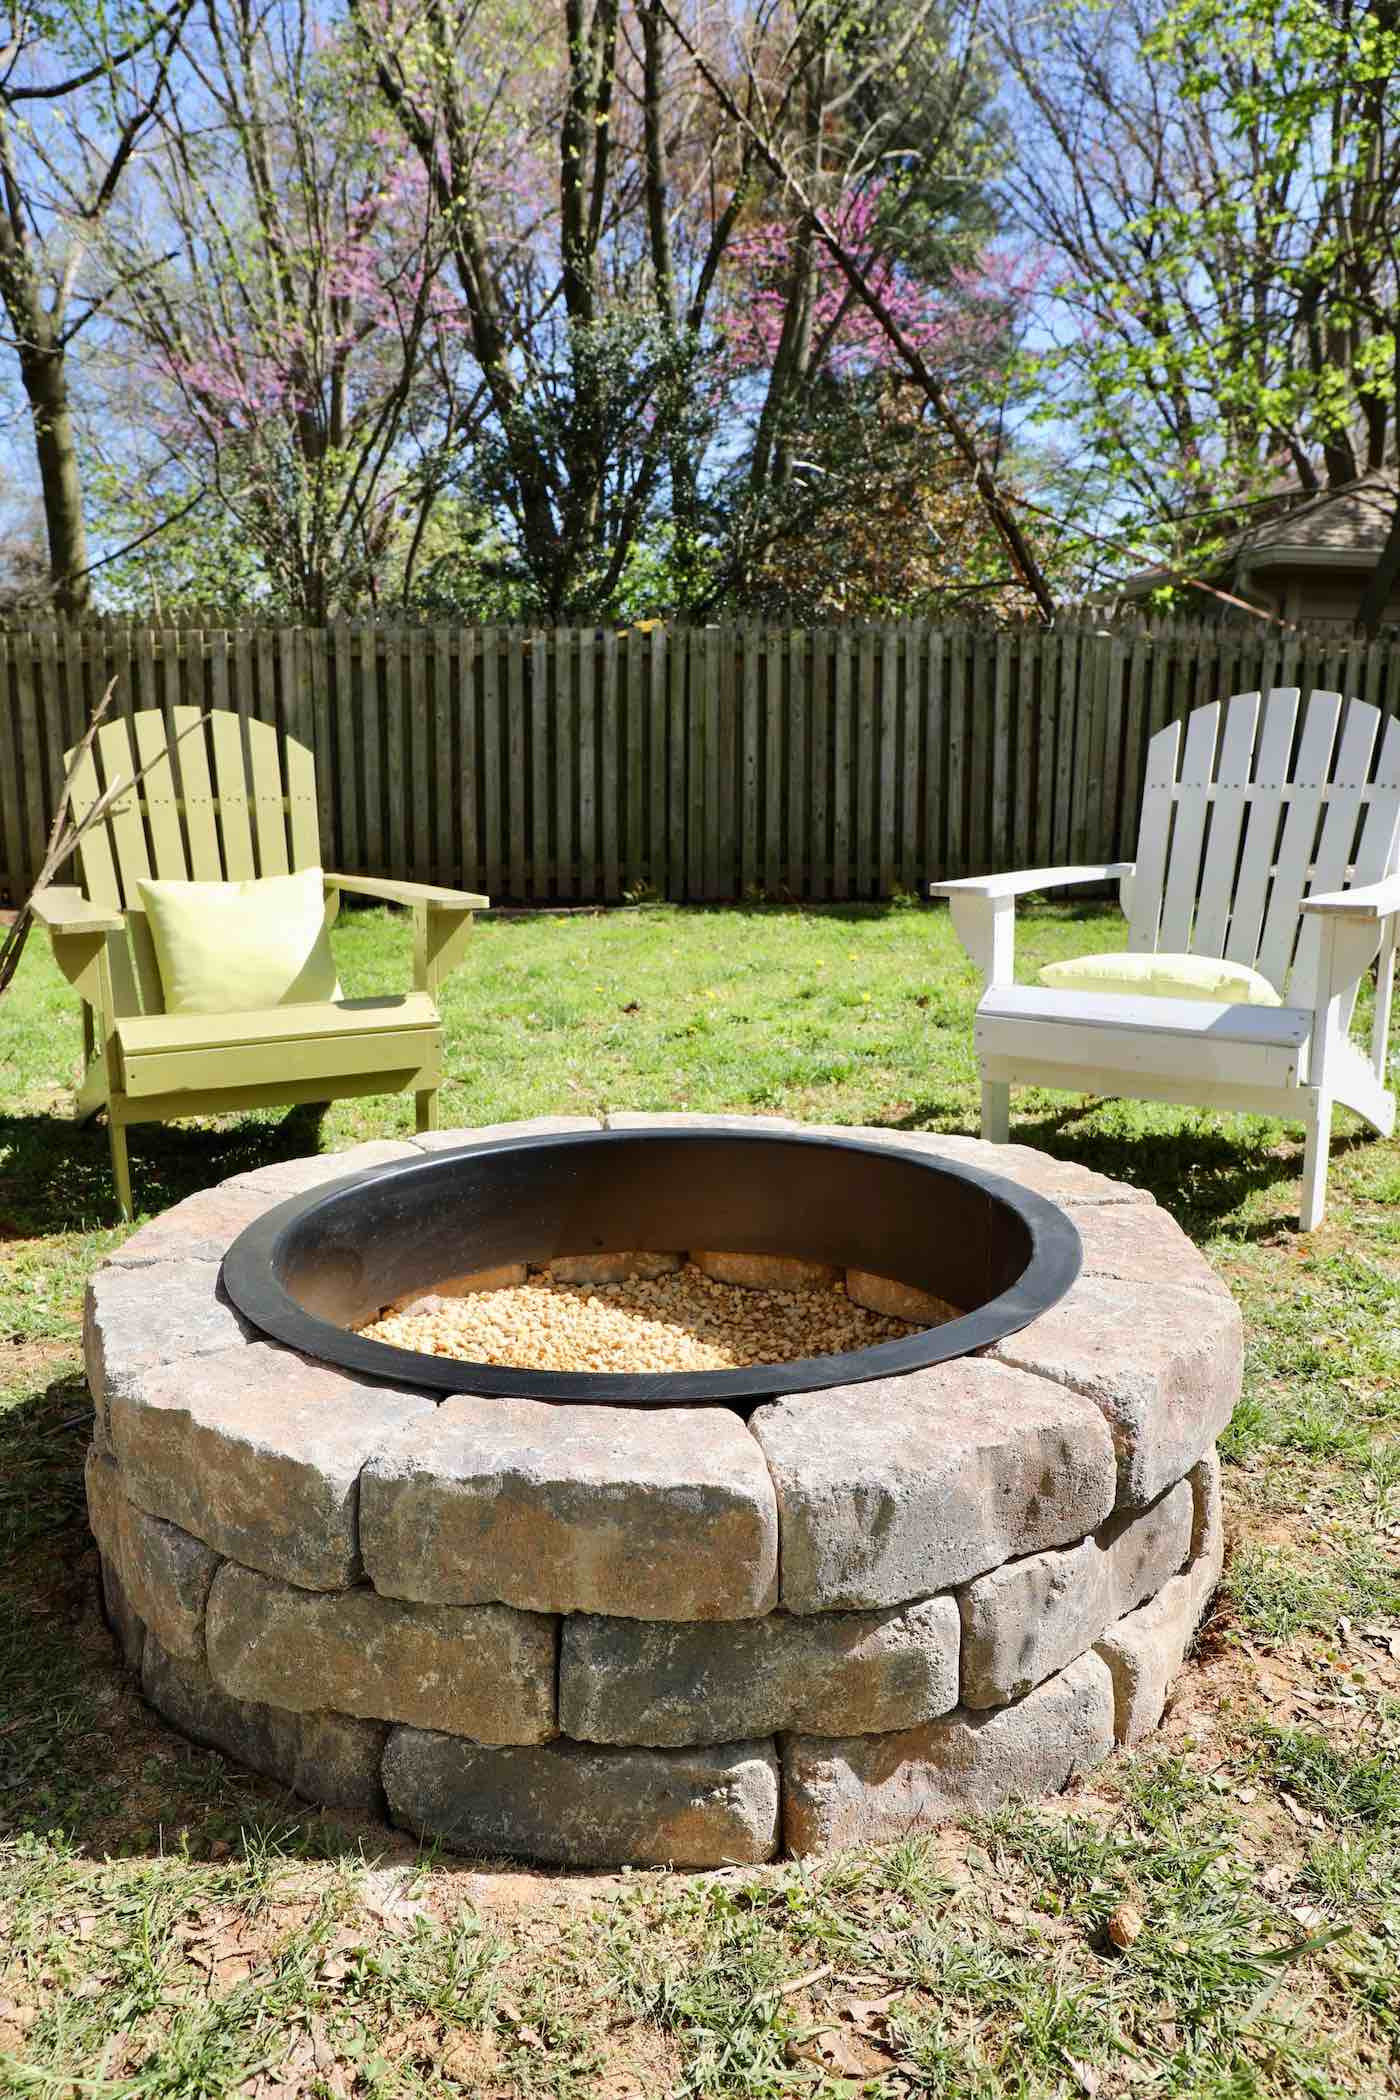 Making A Firepit
 How to Build a Fire Pit in Your Backyard I Used a Fire